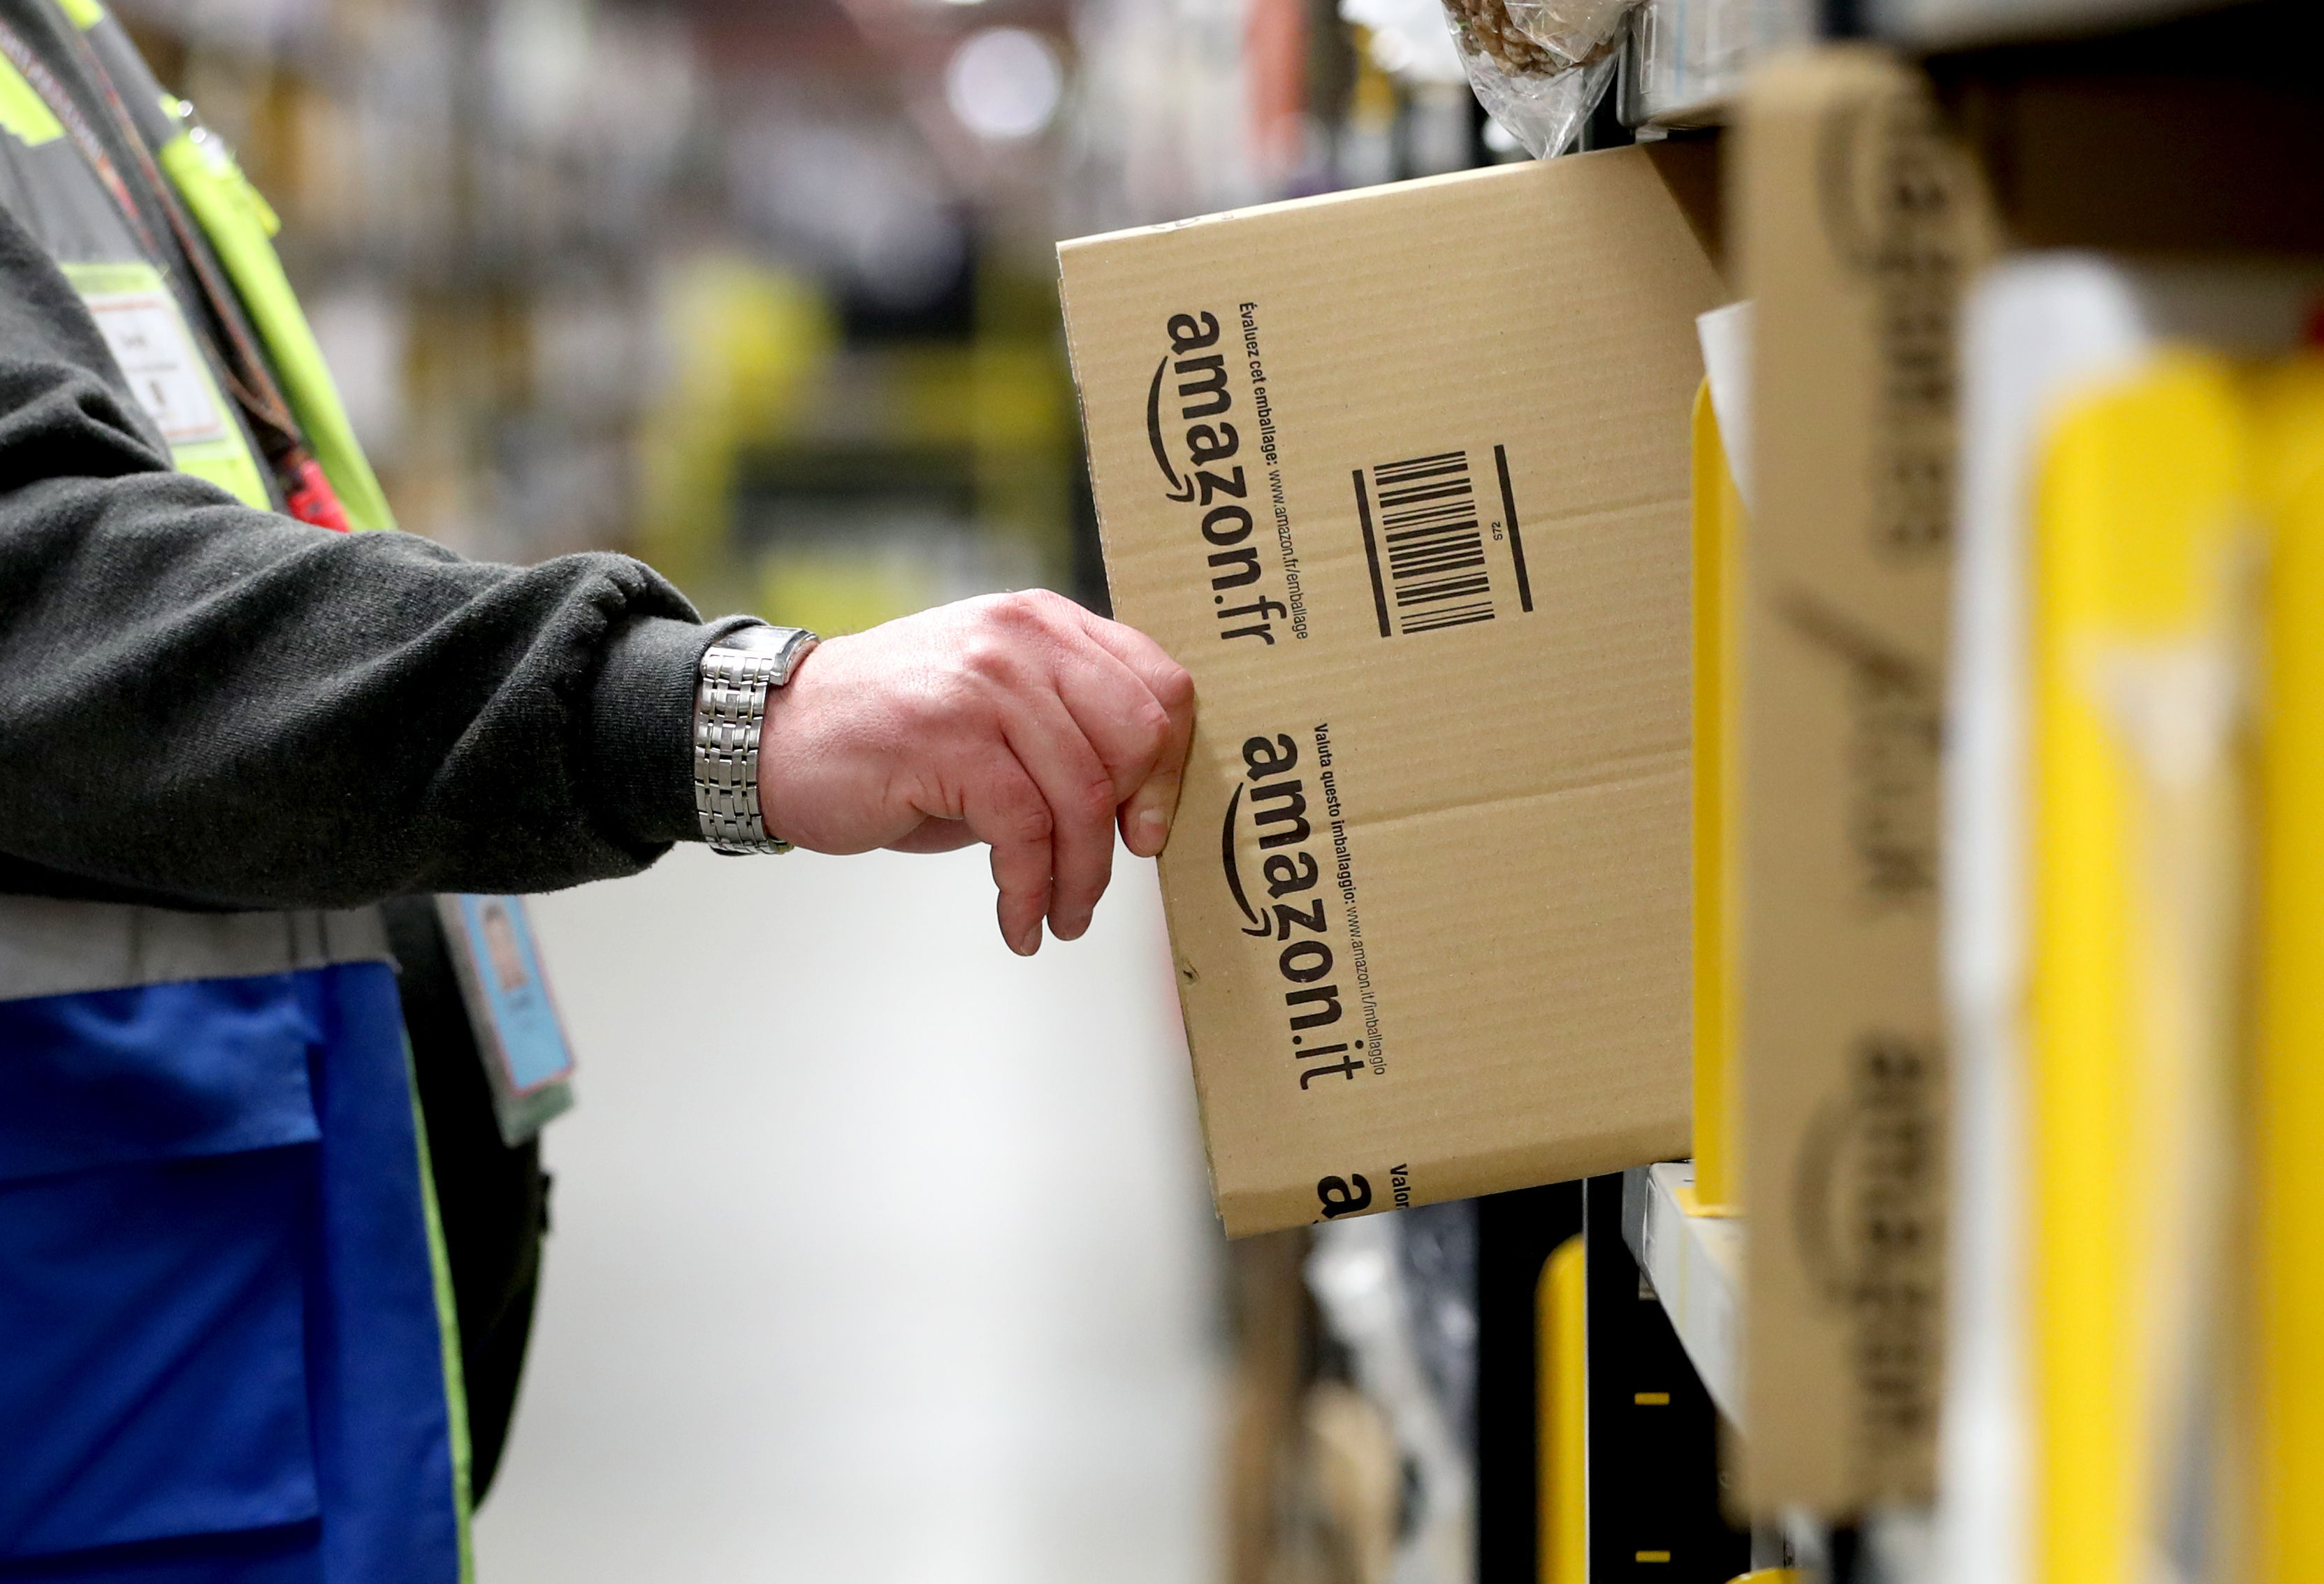 Amazon wants to stop selling 'CRaP' online.